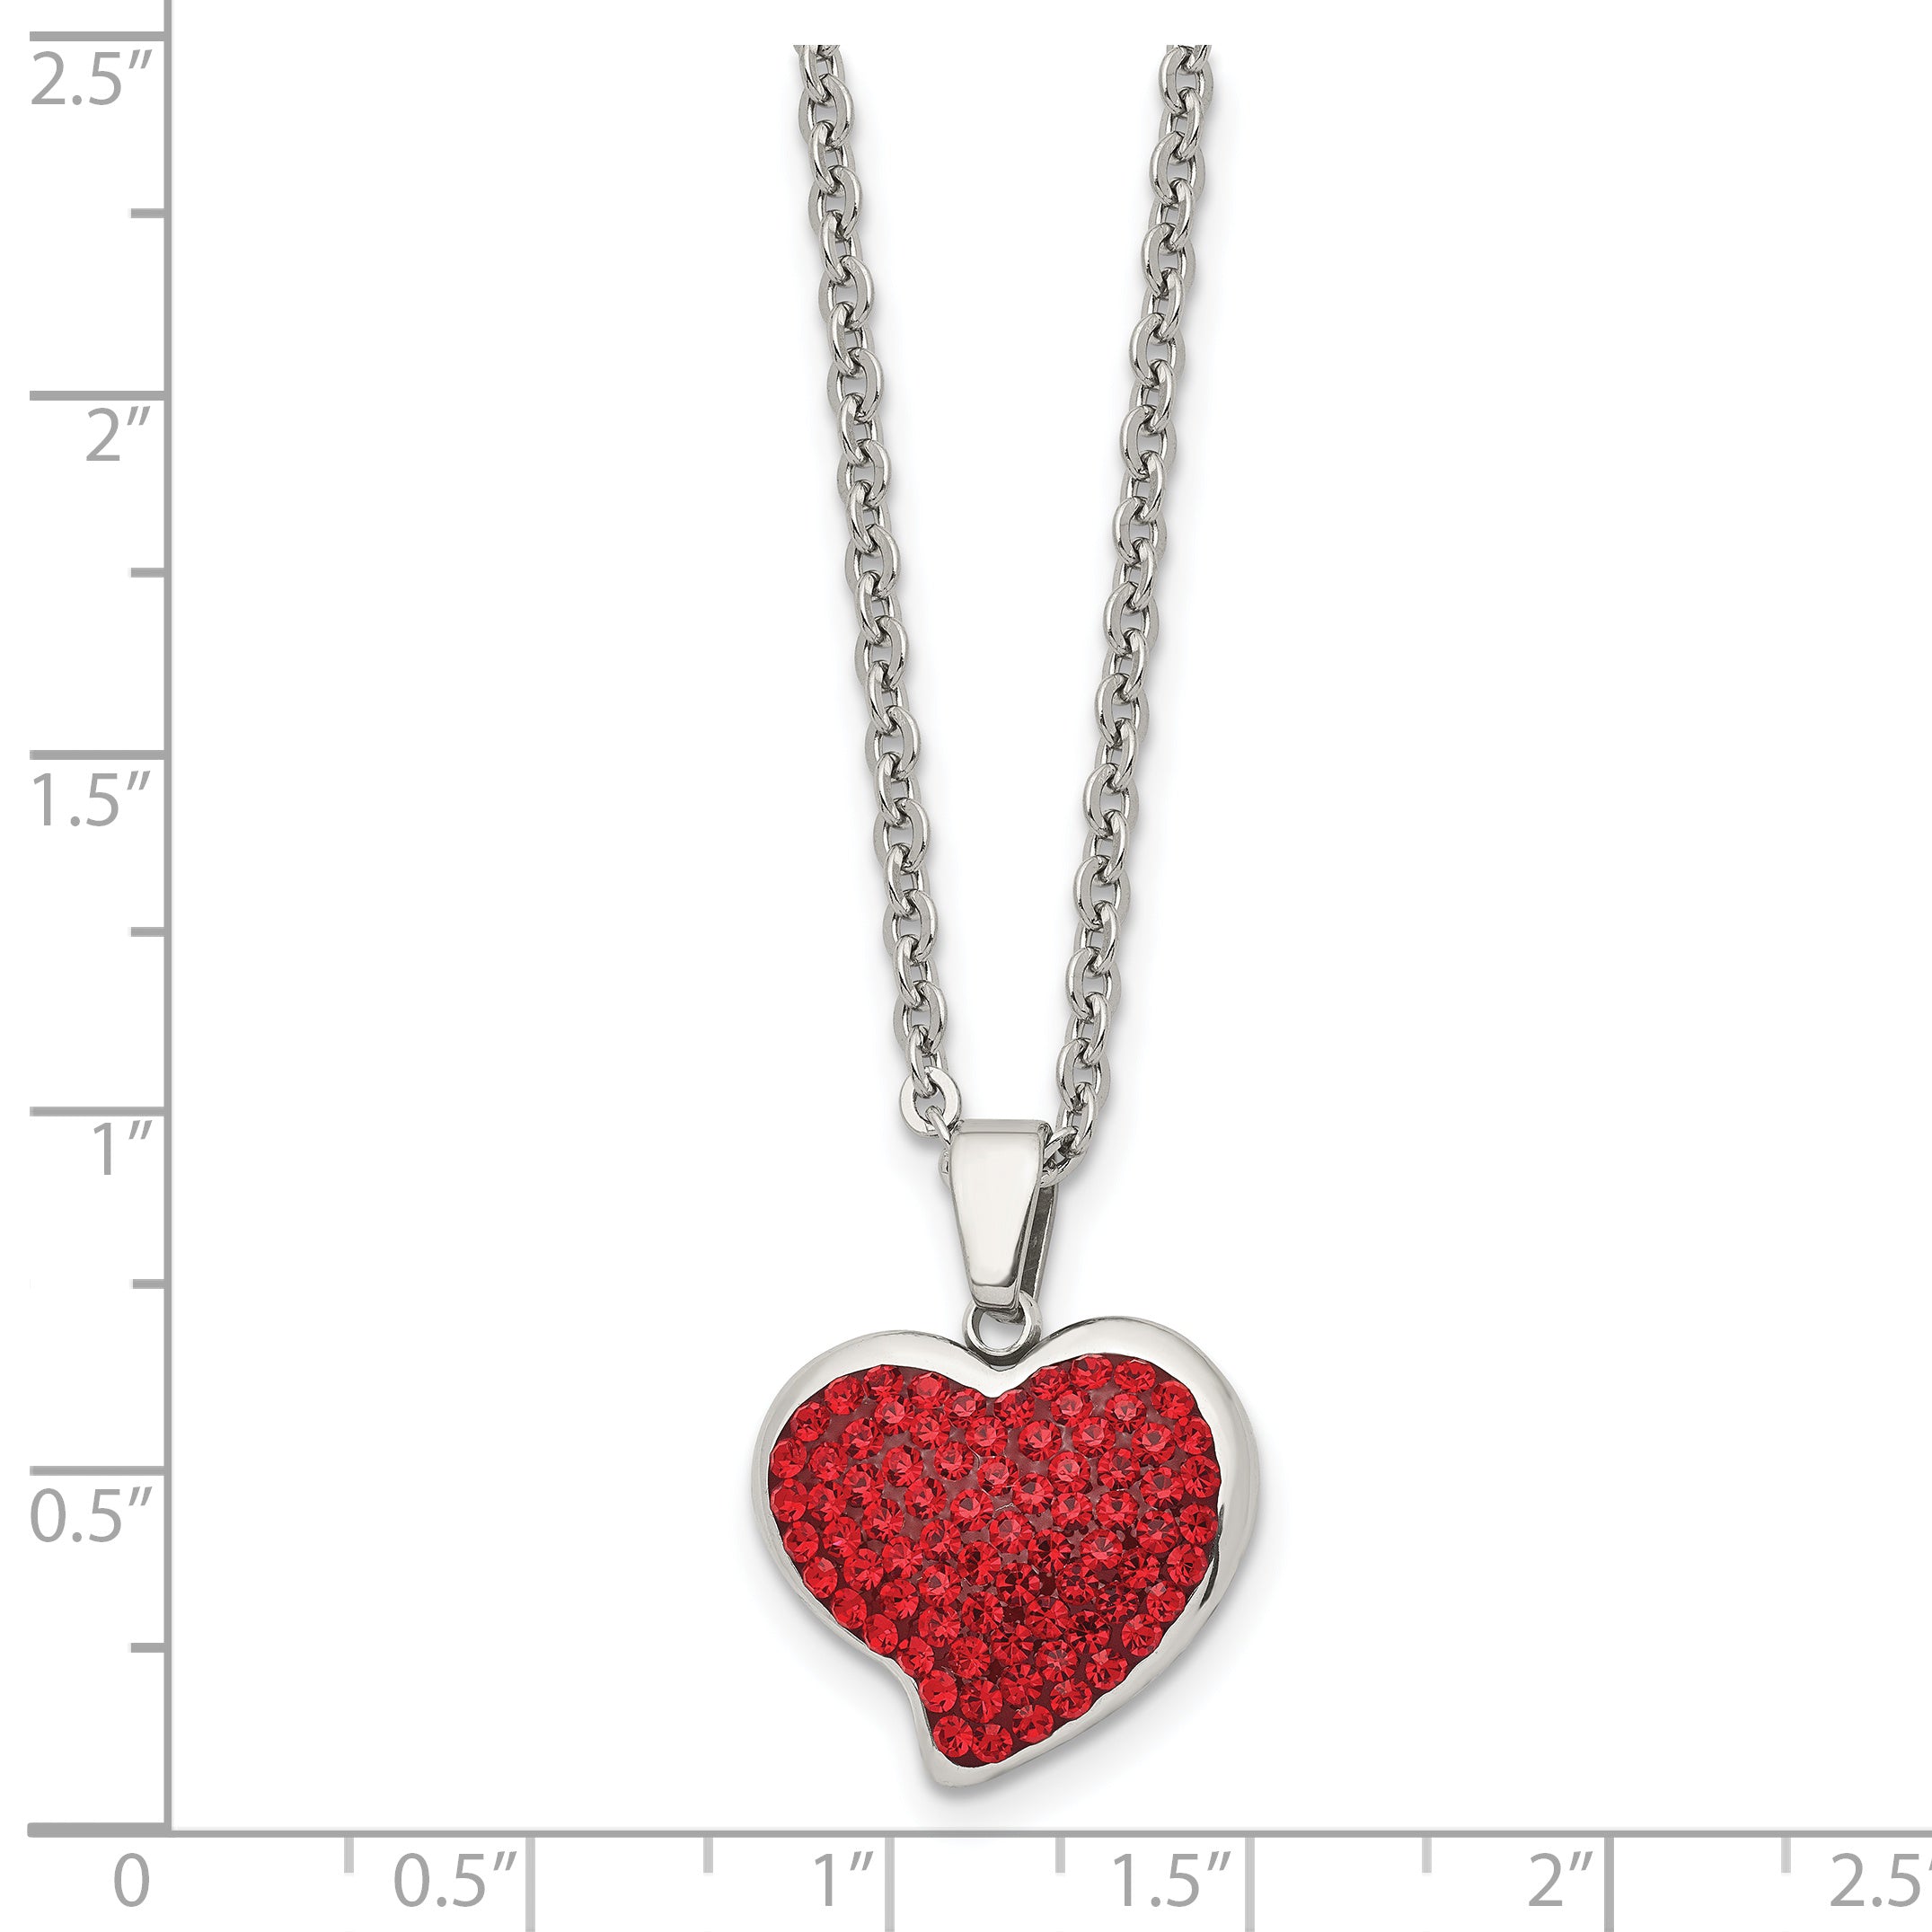 Chisel Stainless Steel Polished with Red Crystal Heart Pendant on a 22 inch Cable Chain Necklace